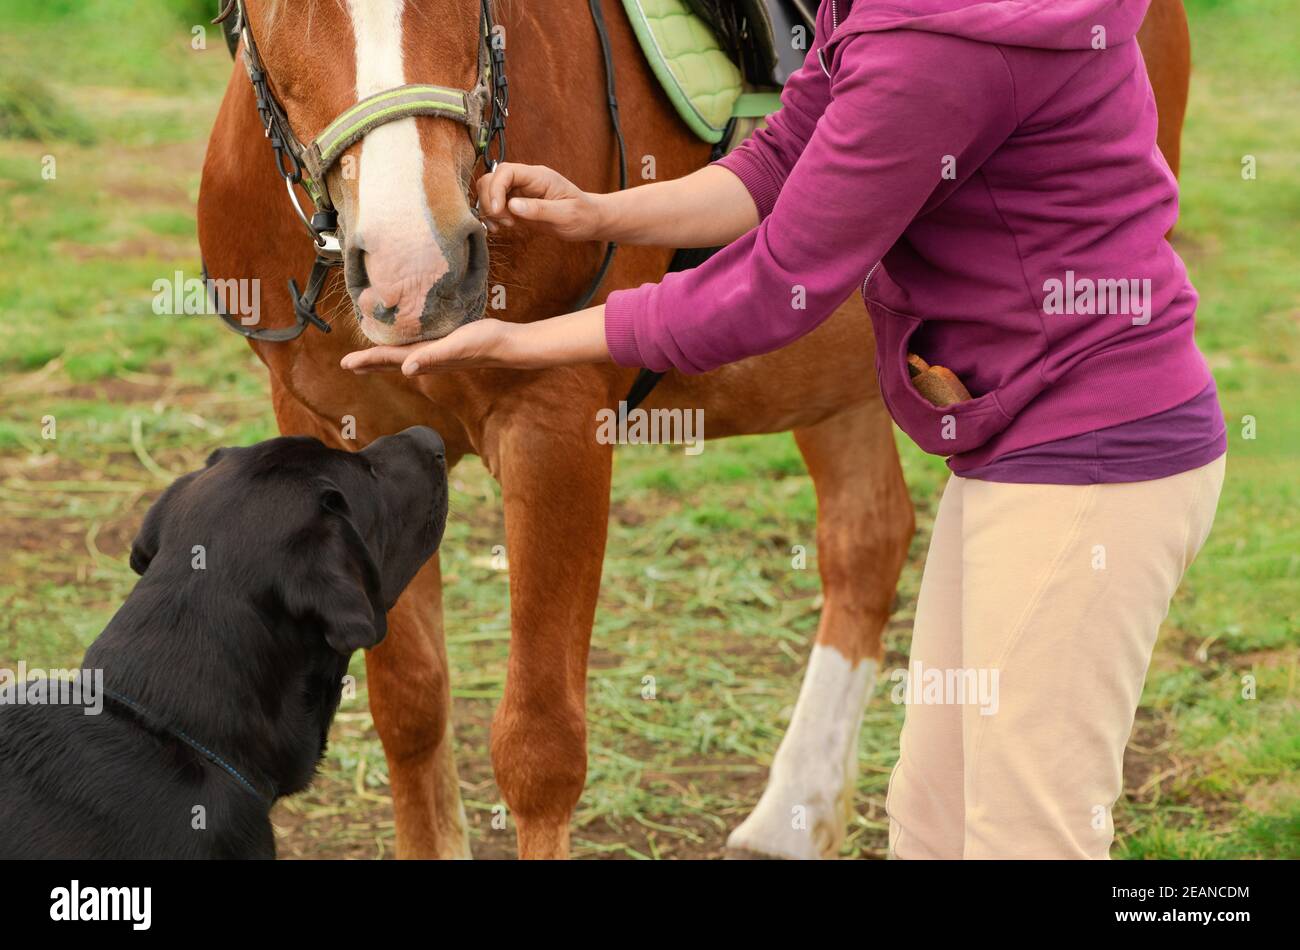 Caucasian woman is standing on the ground and giving her horse the treat in outdoors. Stock Photo